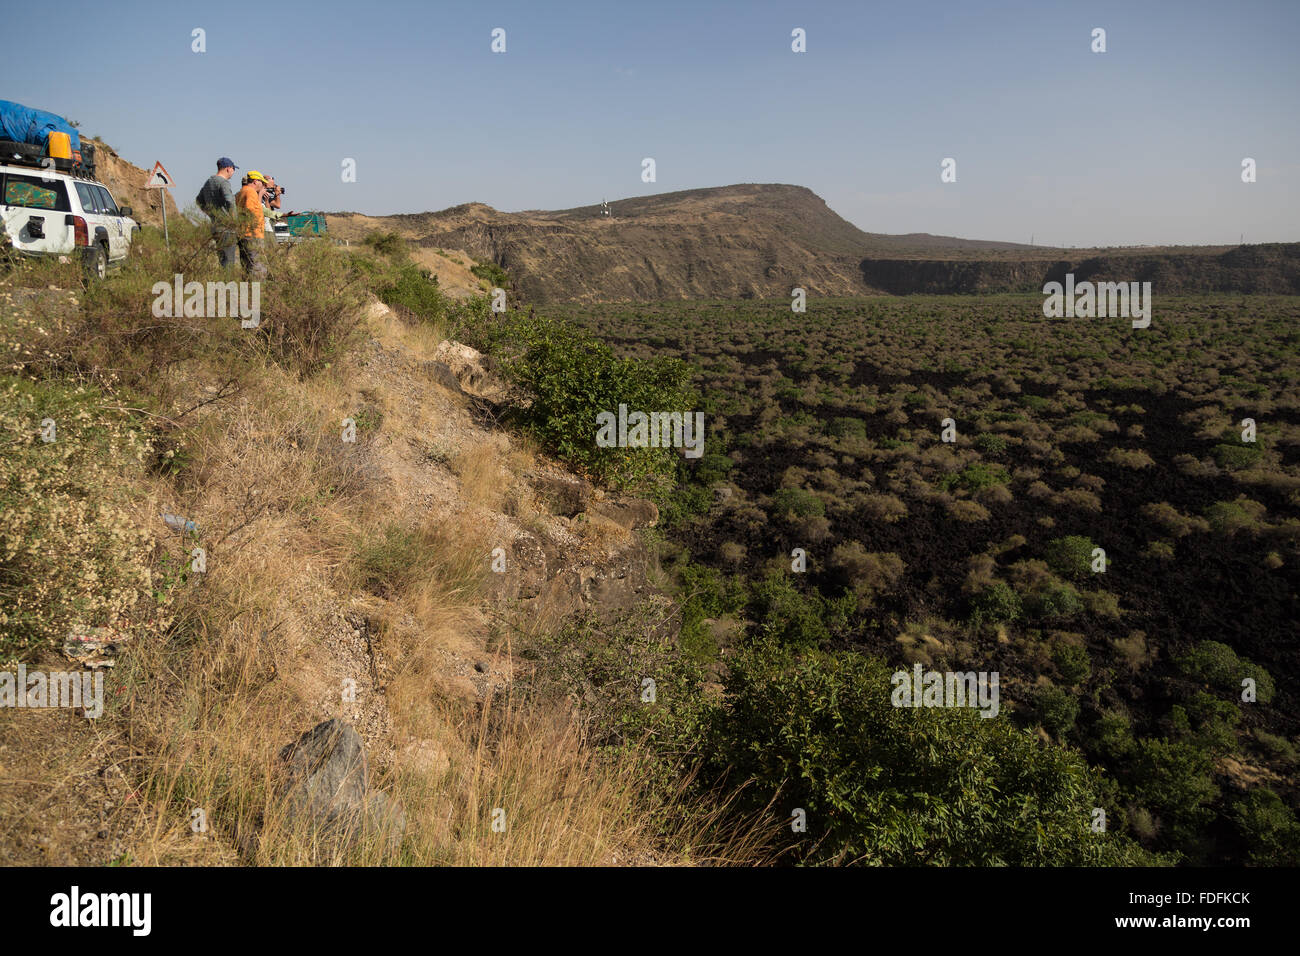 Travellers look out over a recent lava flow which has been colonised by low bushes in eastern Ethiopia Stock Photo